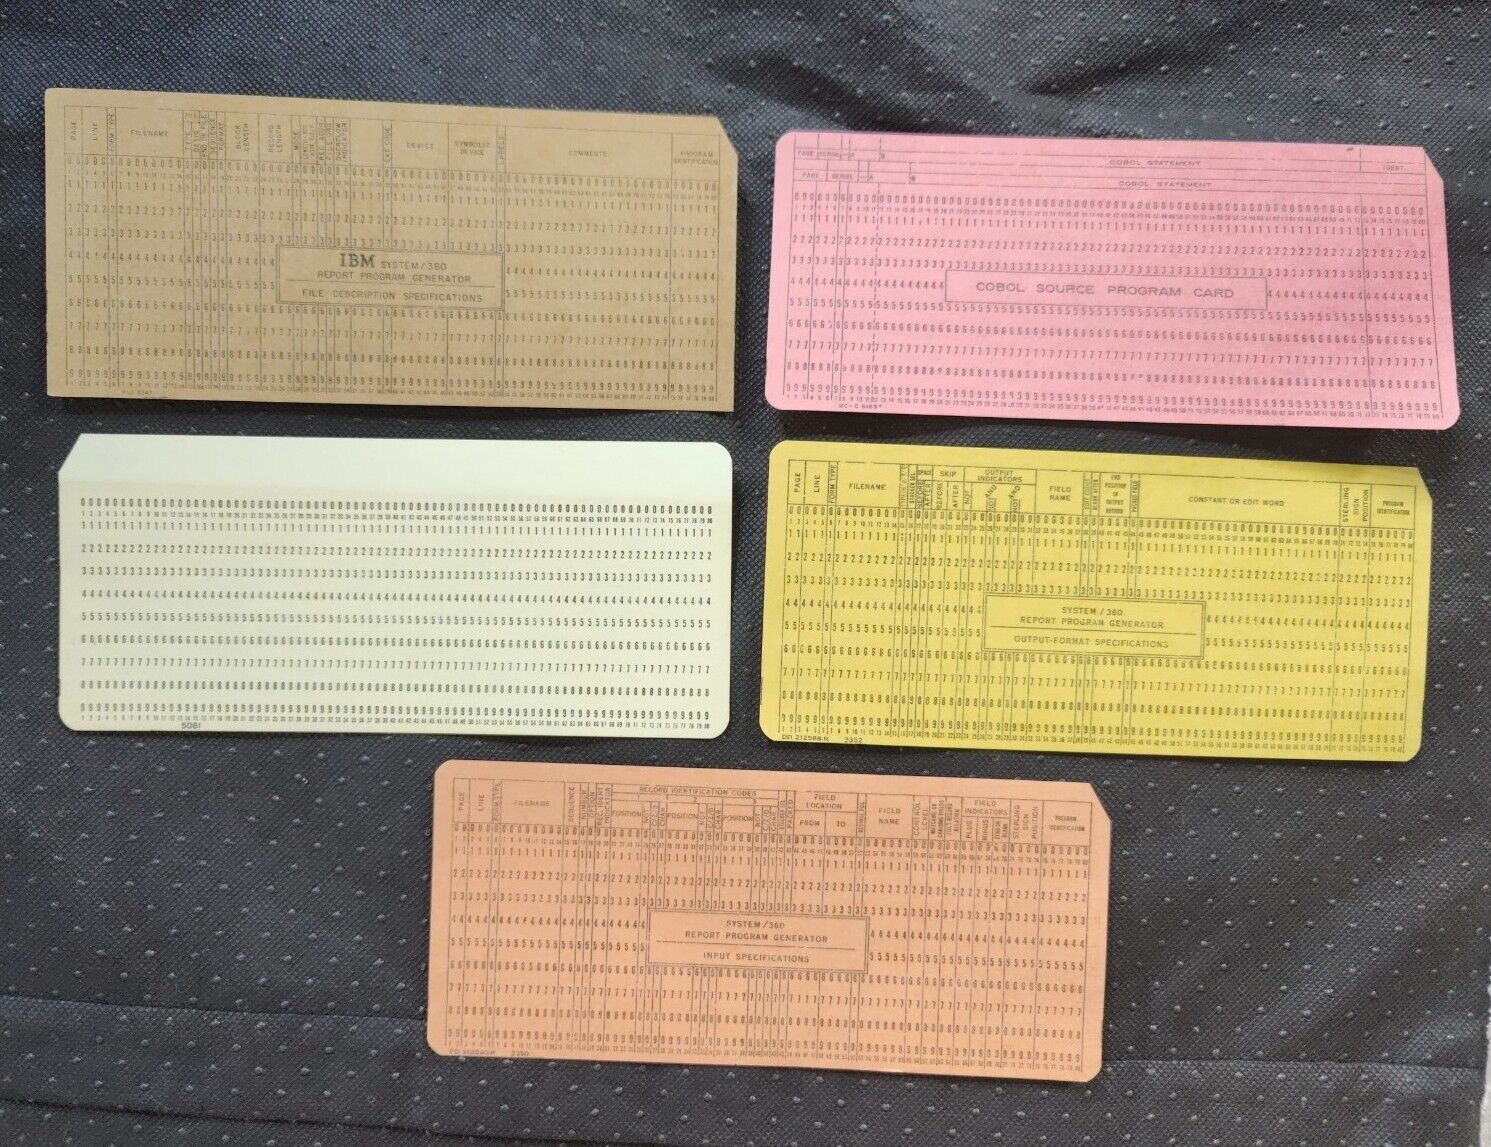 VINTAGE IBM COMPUTER Punch Card LOT (50) ~ 5 DIFFERENT COLORS ~ COBOL SYSTEMS